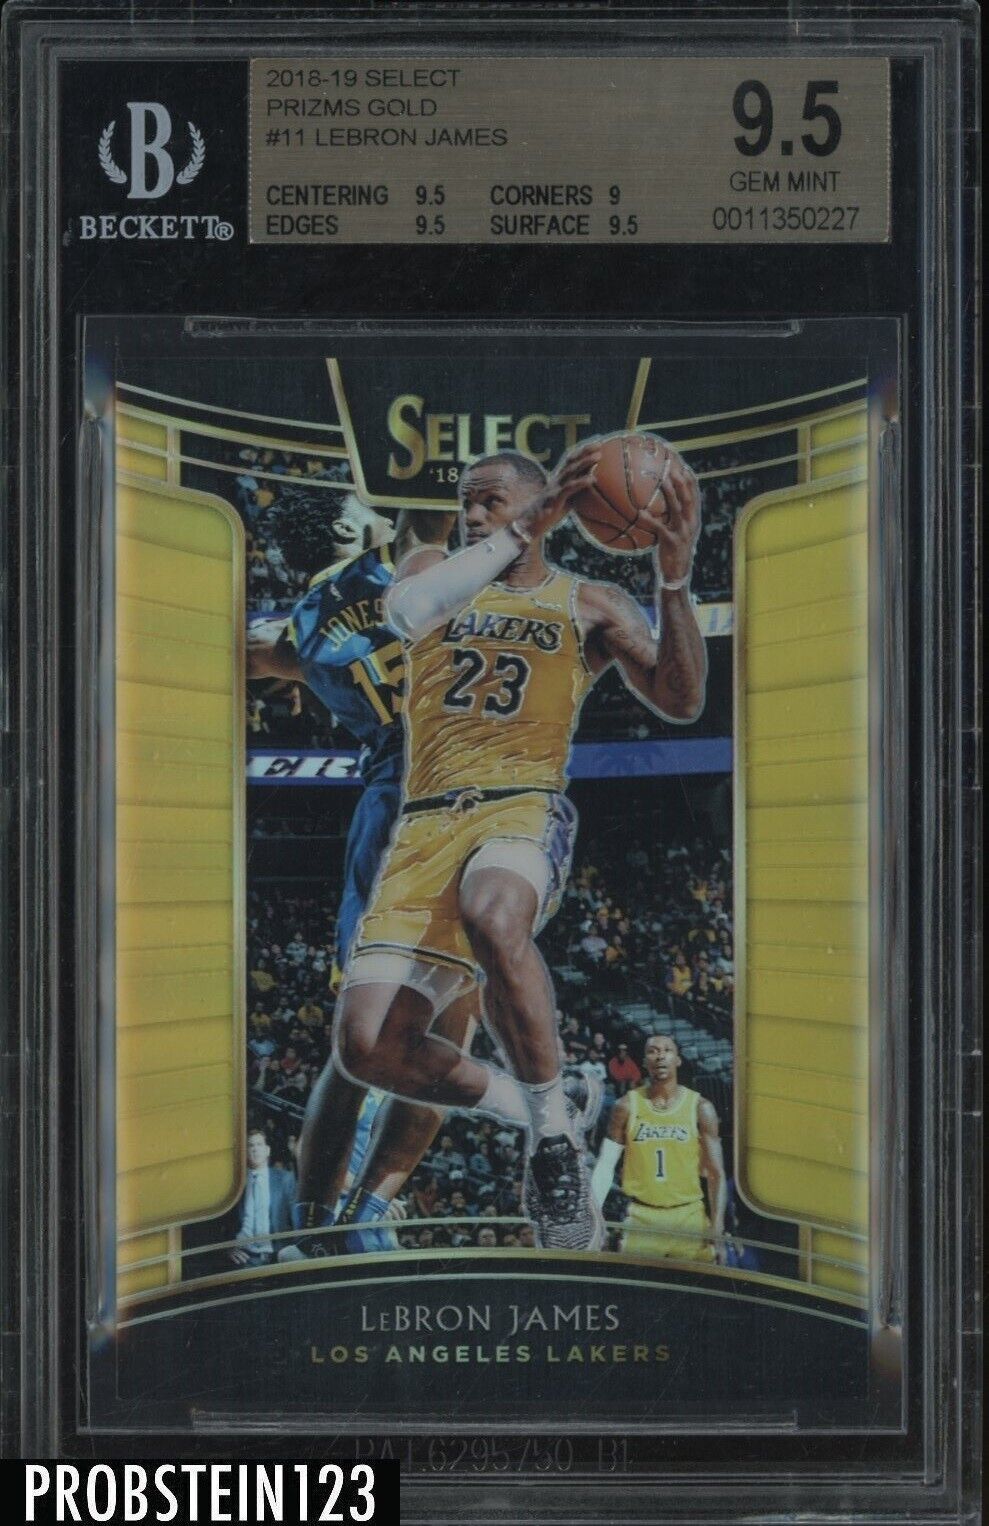 panini select basketball - On Ebay - Multiple Results on One Page